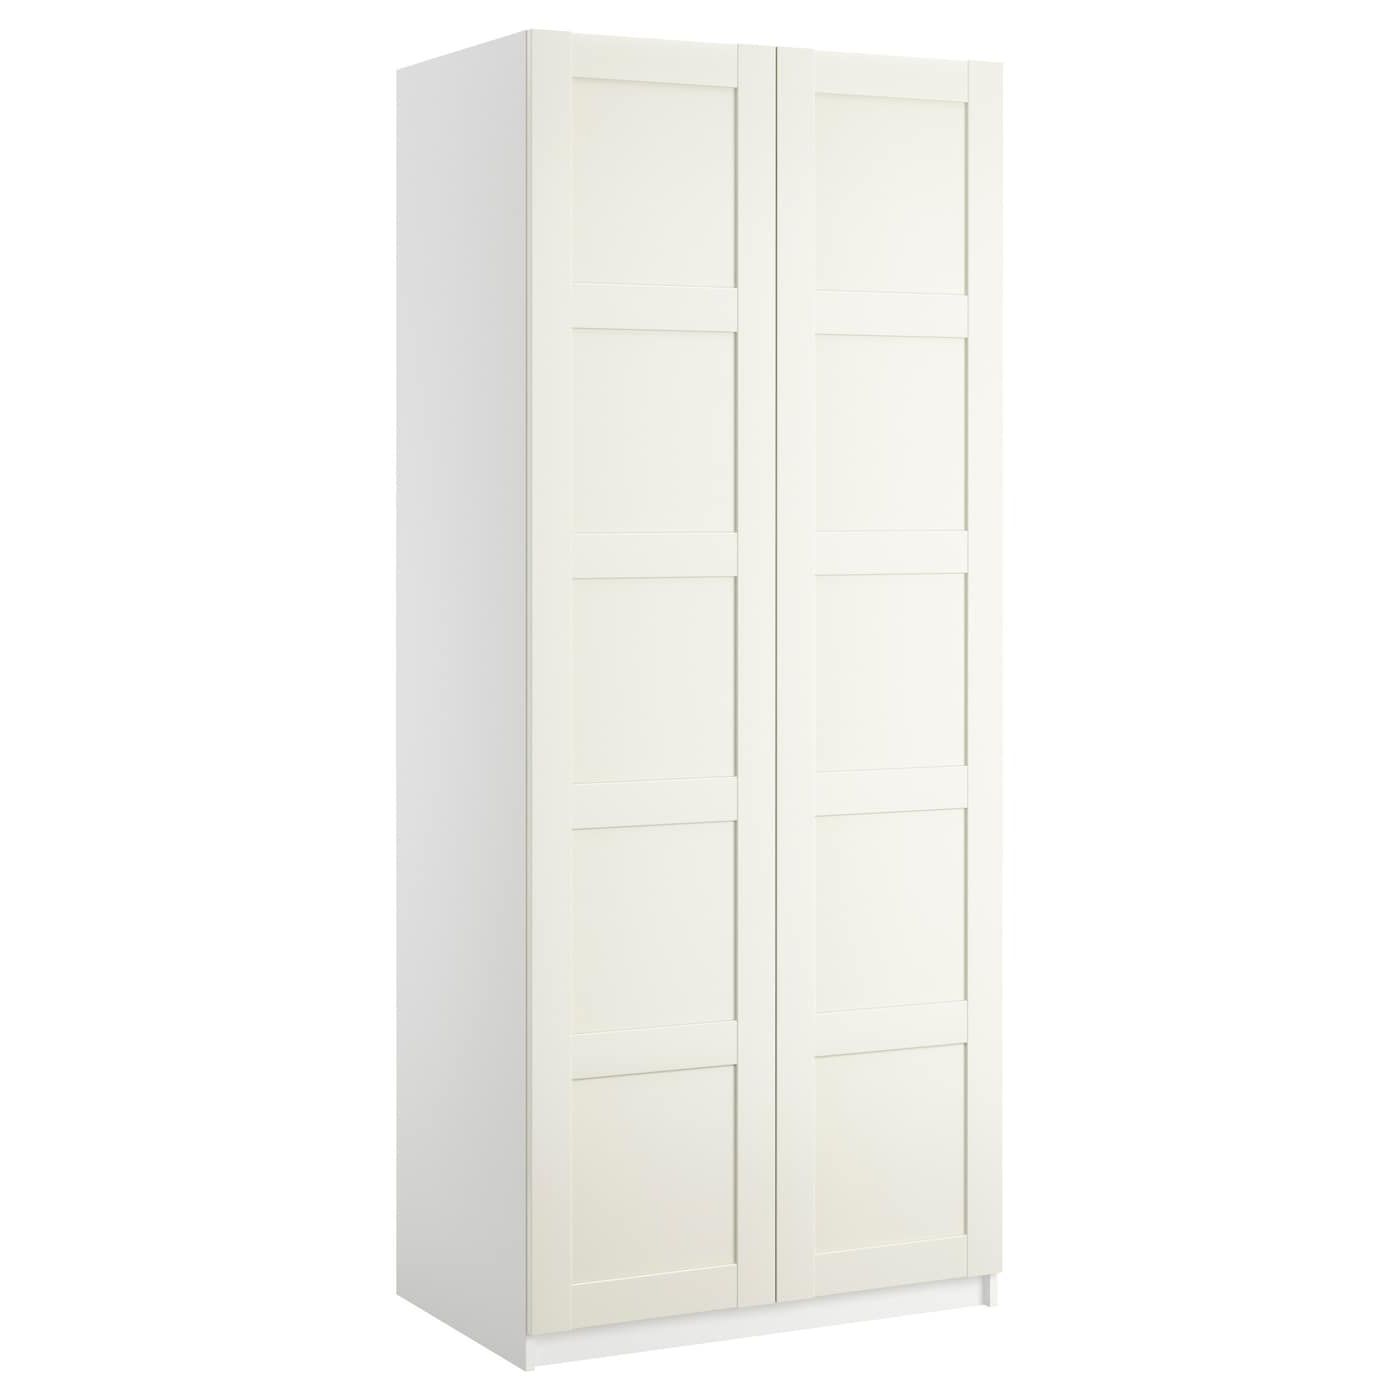 Pax / Bergsbo Wardrobe With 2 Doors, White/white, 393/8x235/8x931/8" – Ikea Inside Two Door White Wardrobes (Gallery 4 of 20)